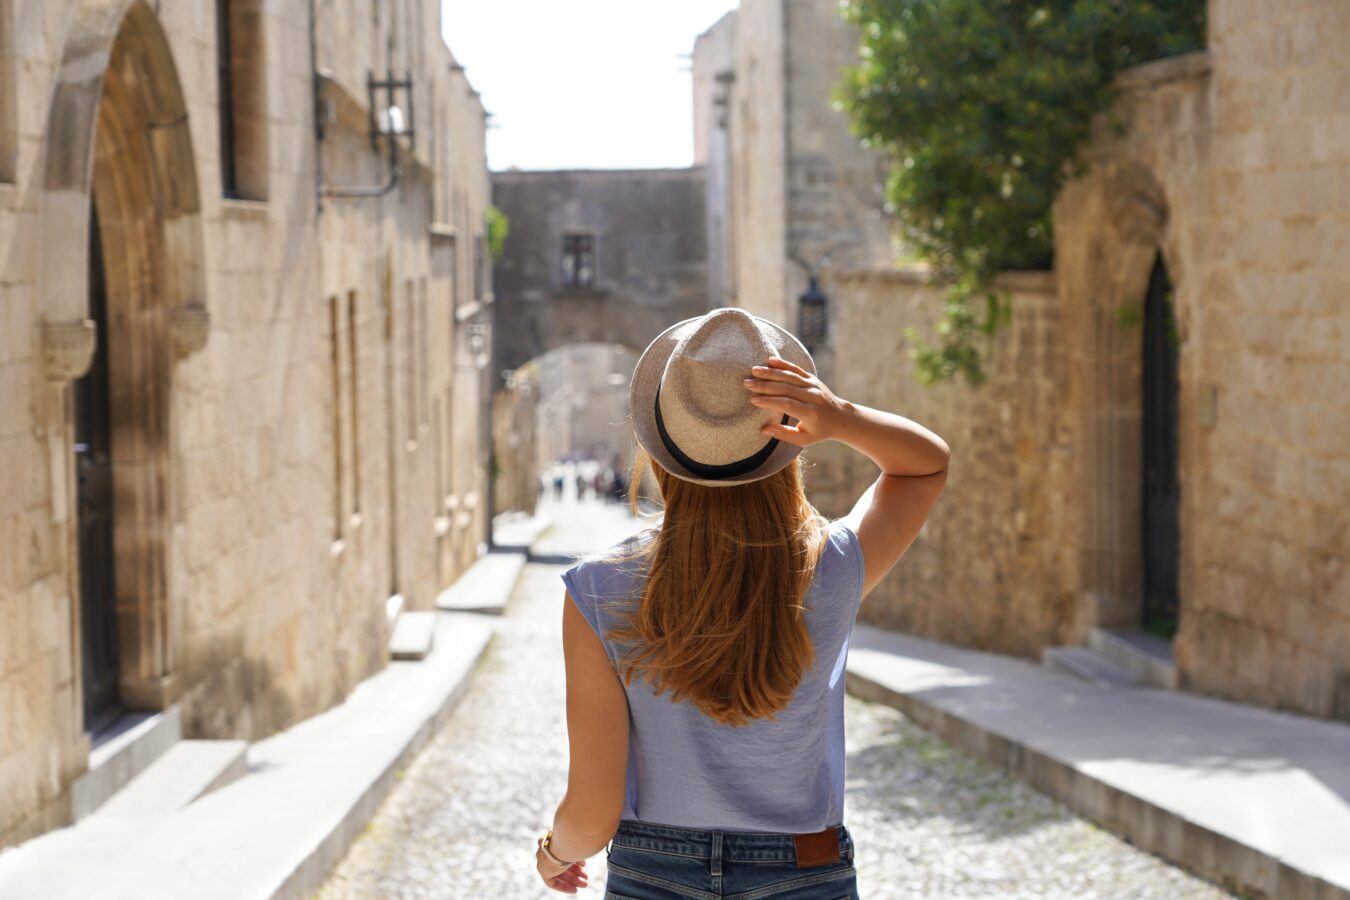 Tourist discovering what Rhodes is known for, starting with the old town.